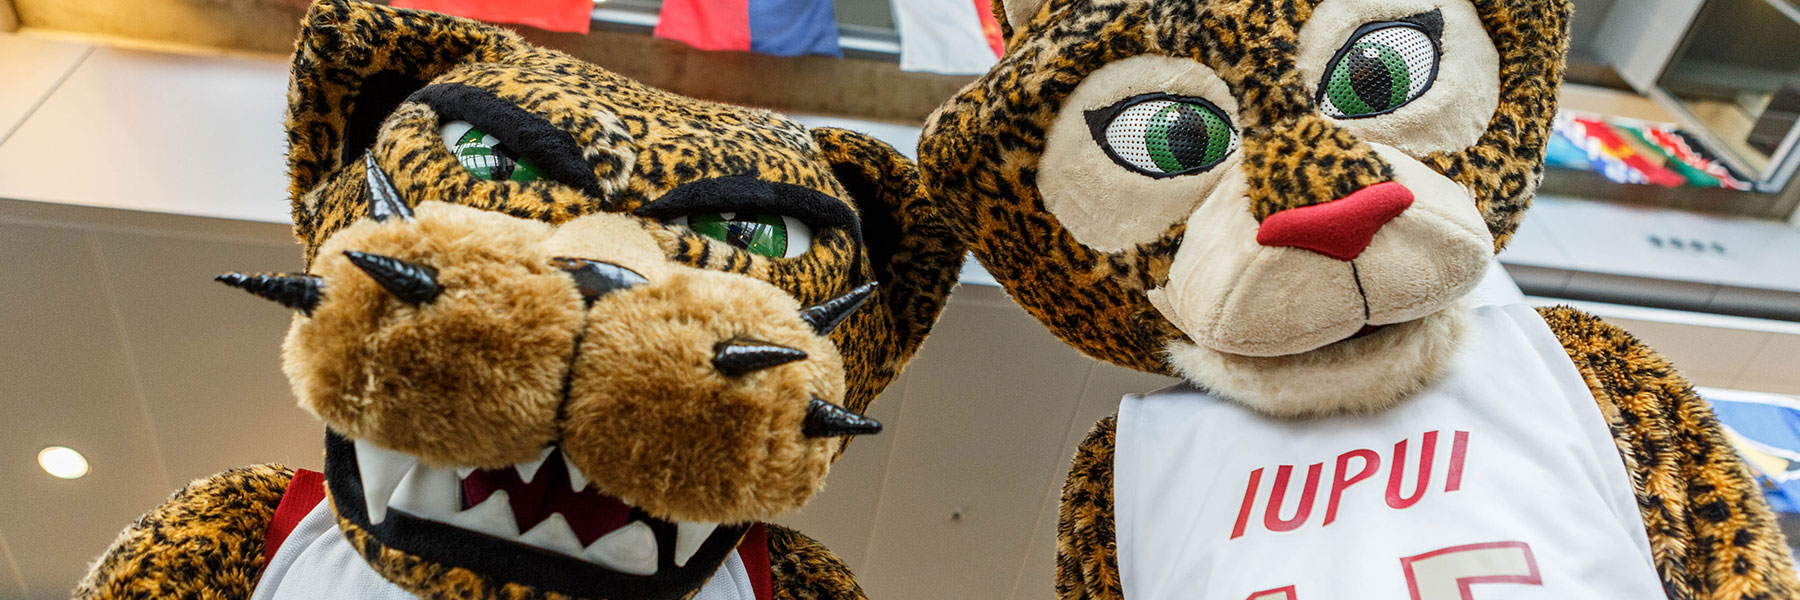 Jawz and Jazzy, two of IUPUI's mascots, fiercely looking at the camera.